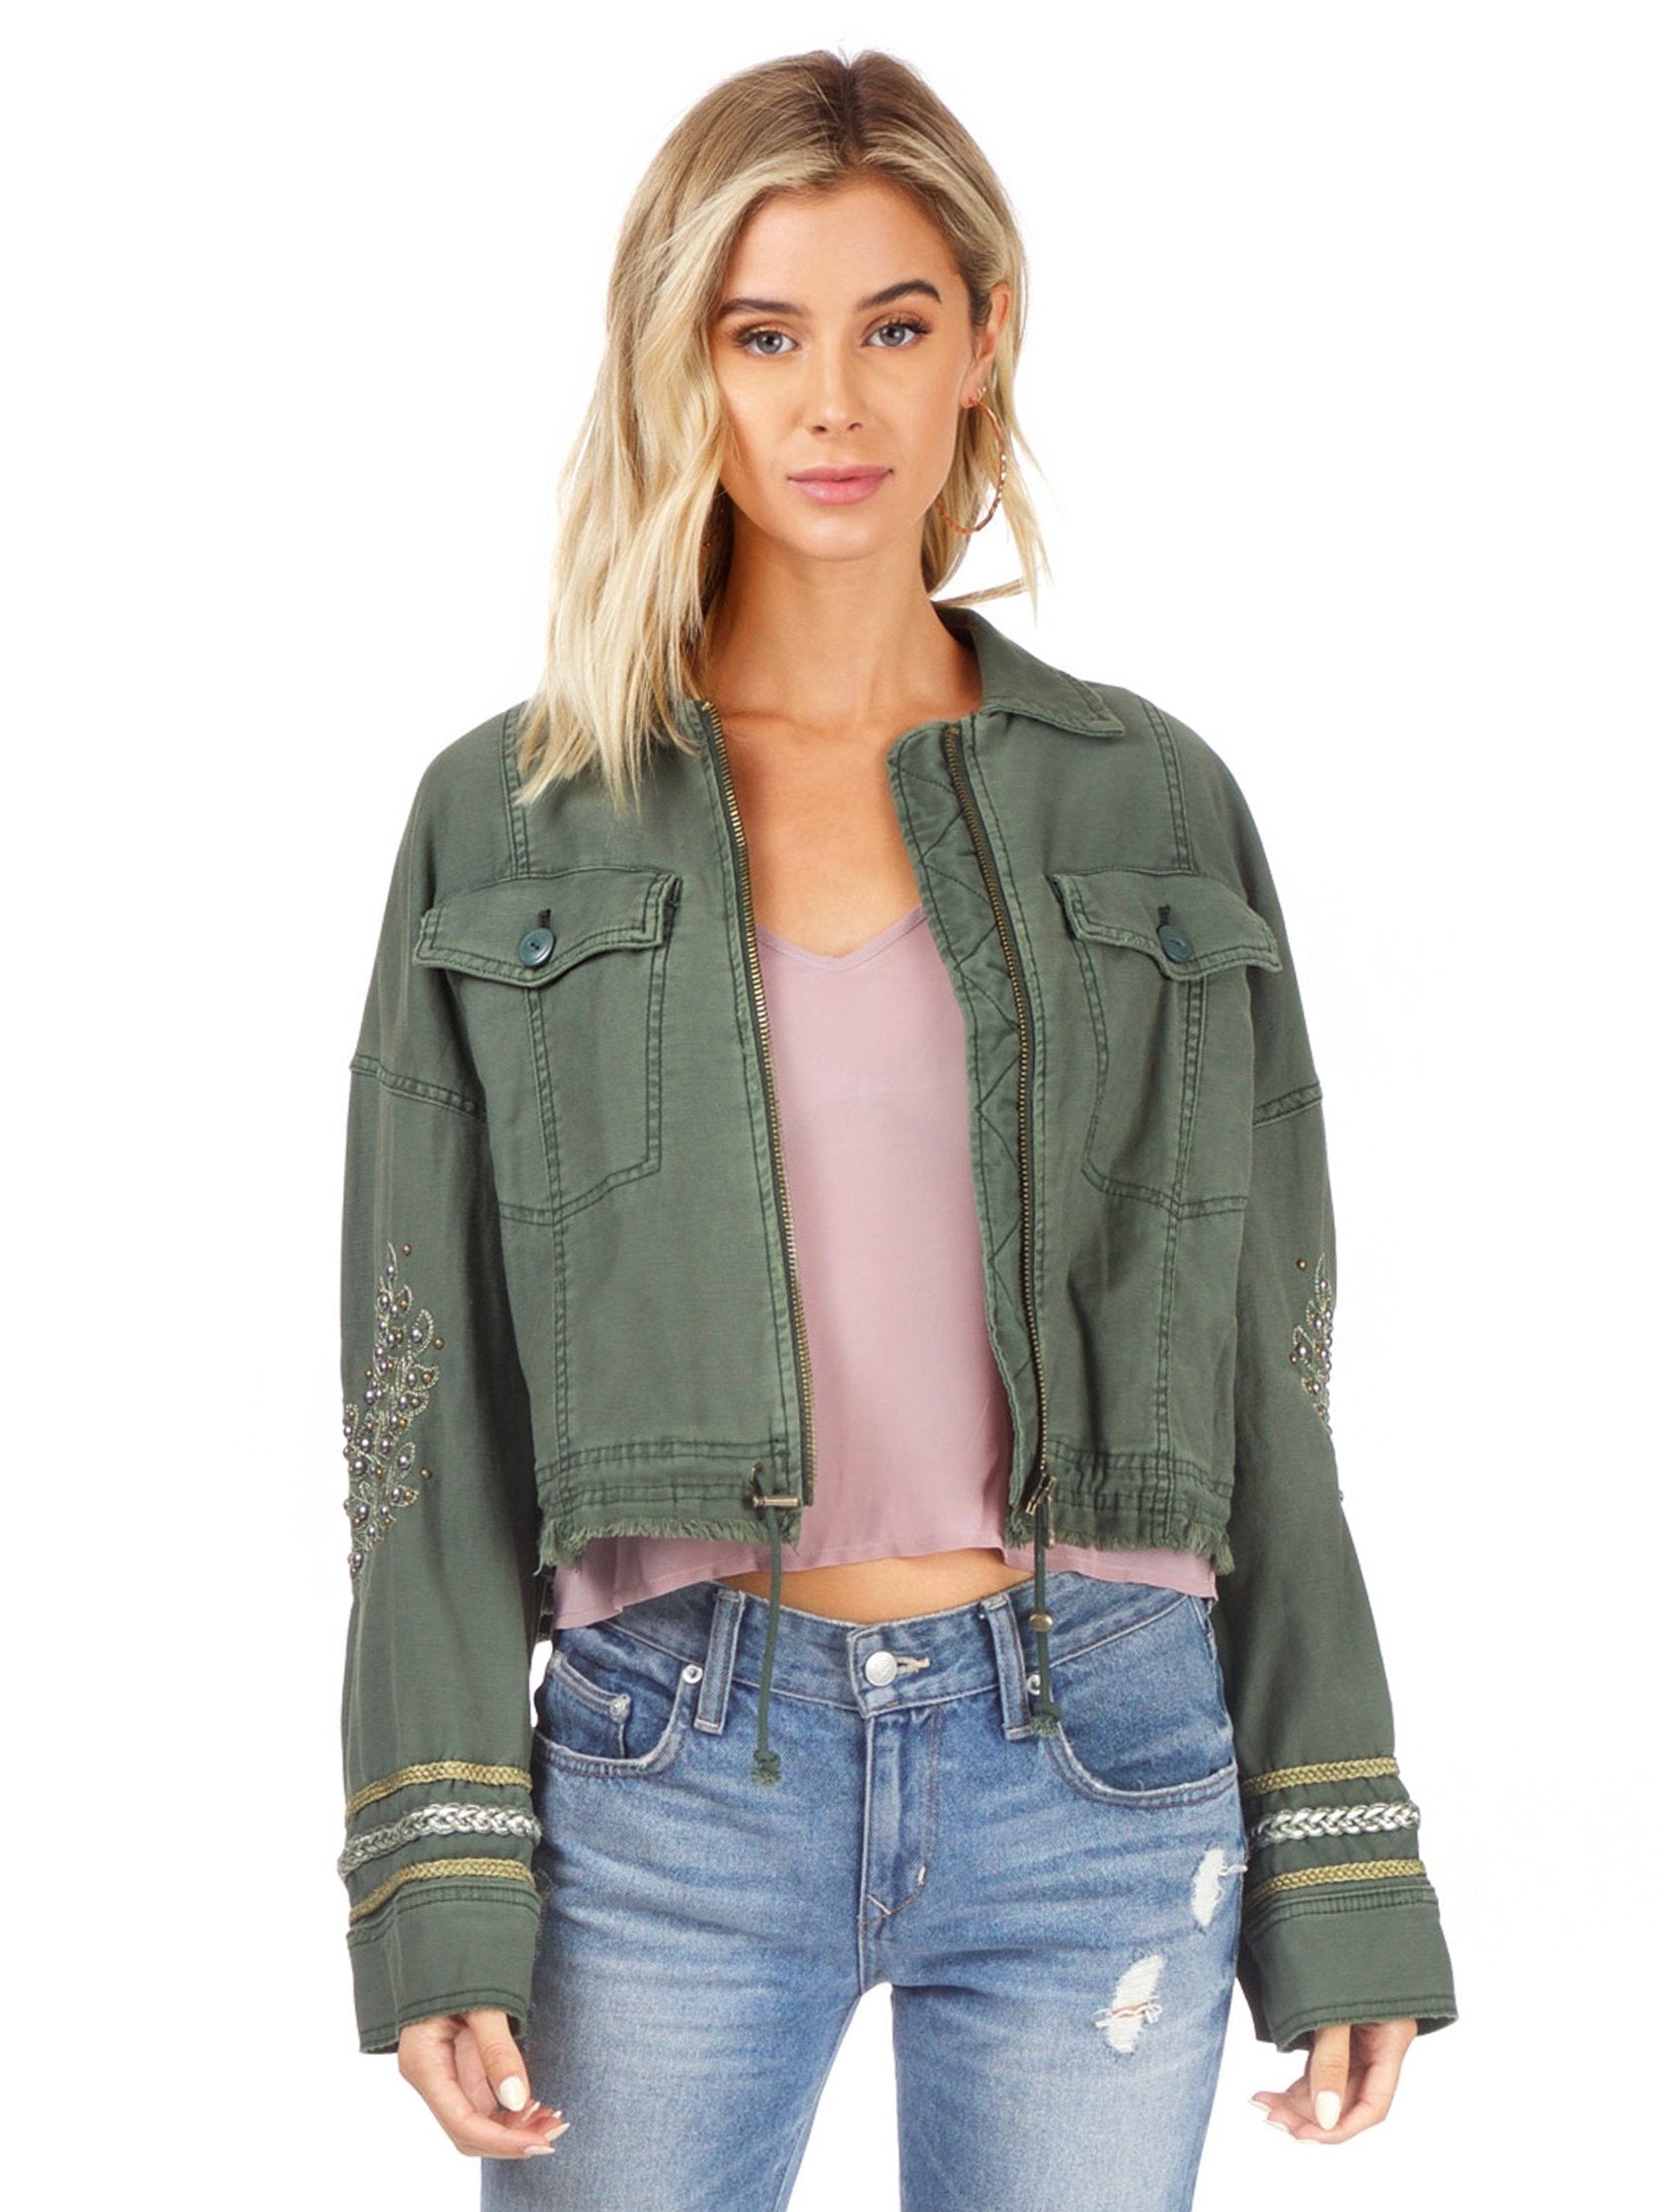 Woman wearing a jacket rental from Free People called Extreme Cropped Military Jacket